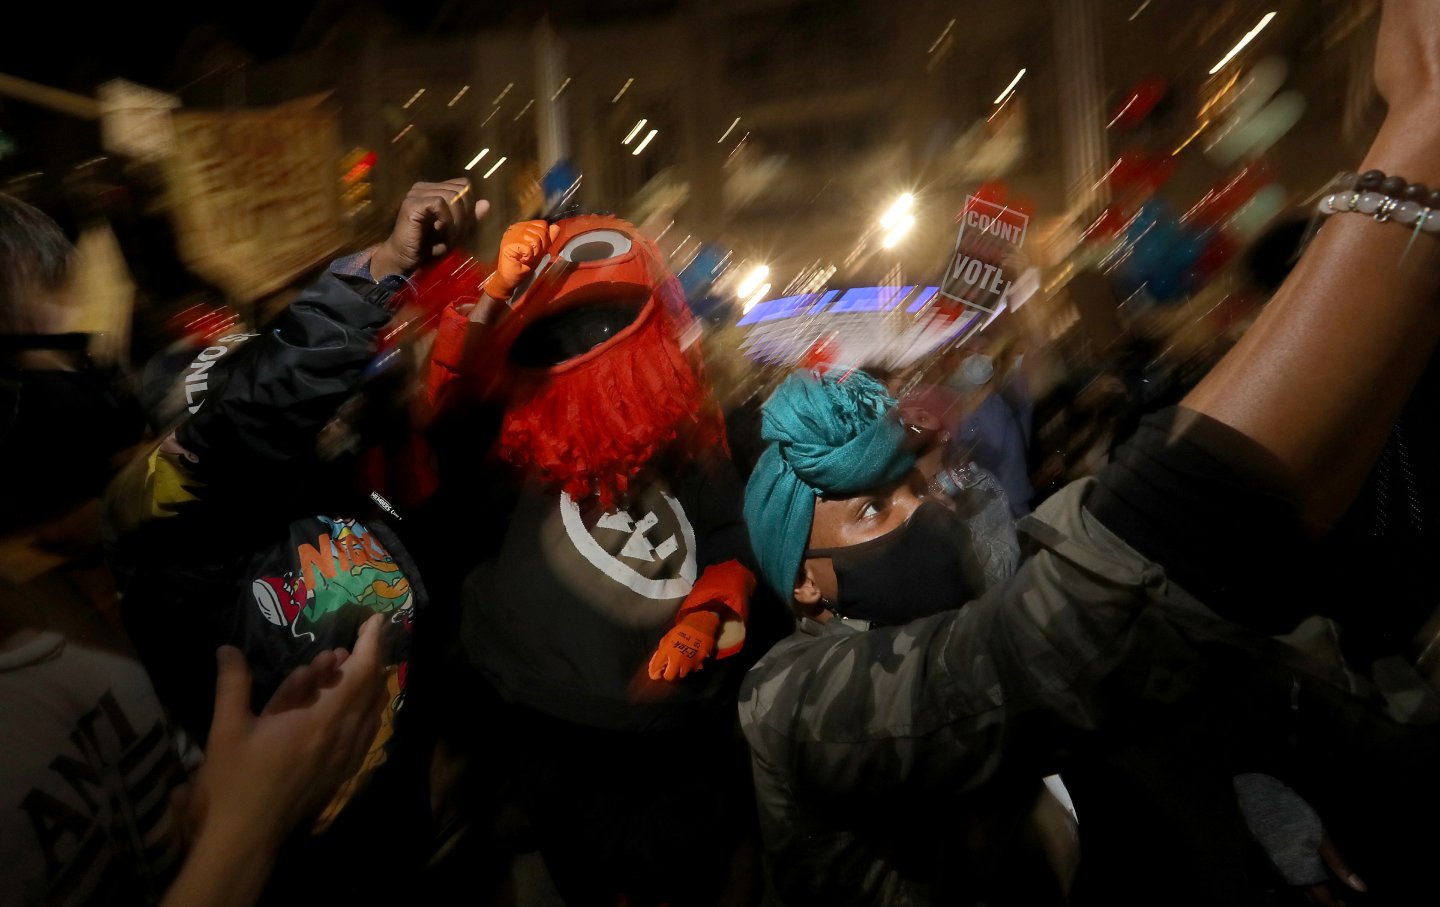 A man in a gritty costume dances with protestors.